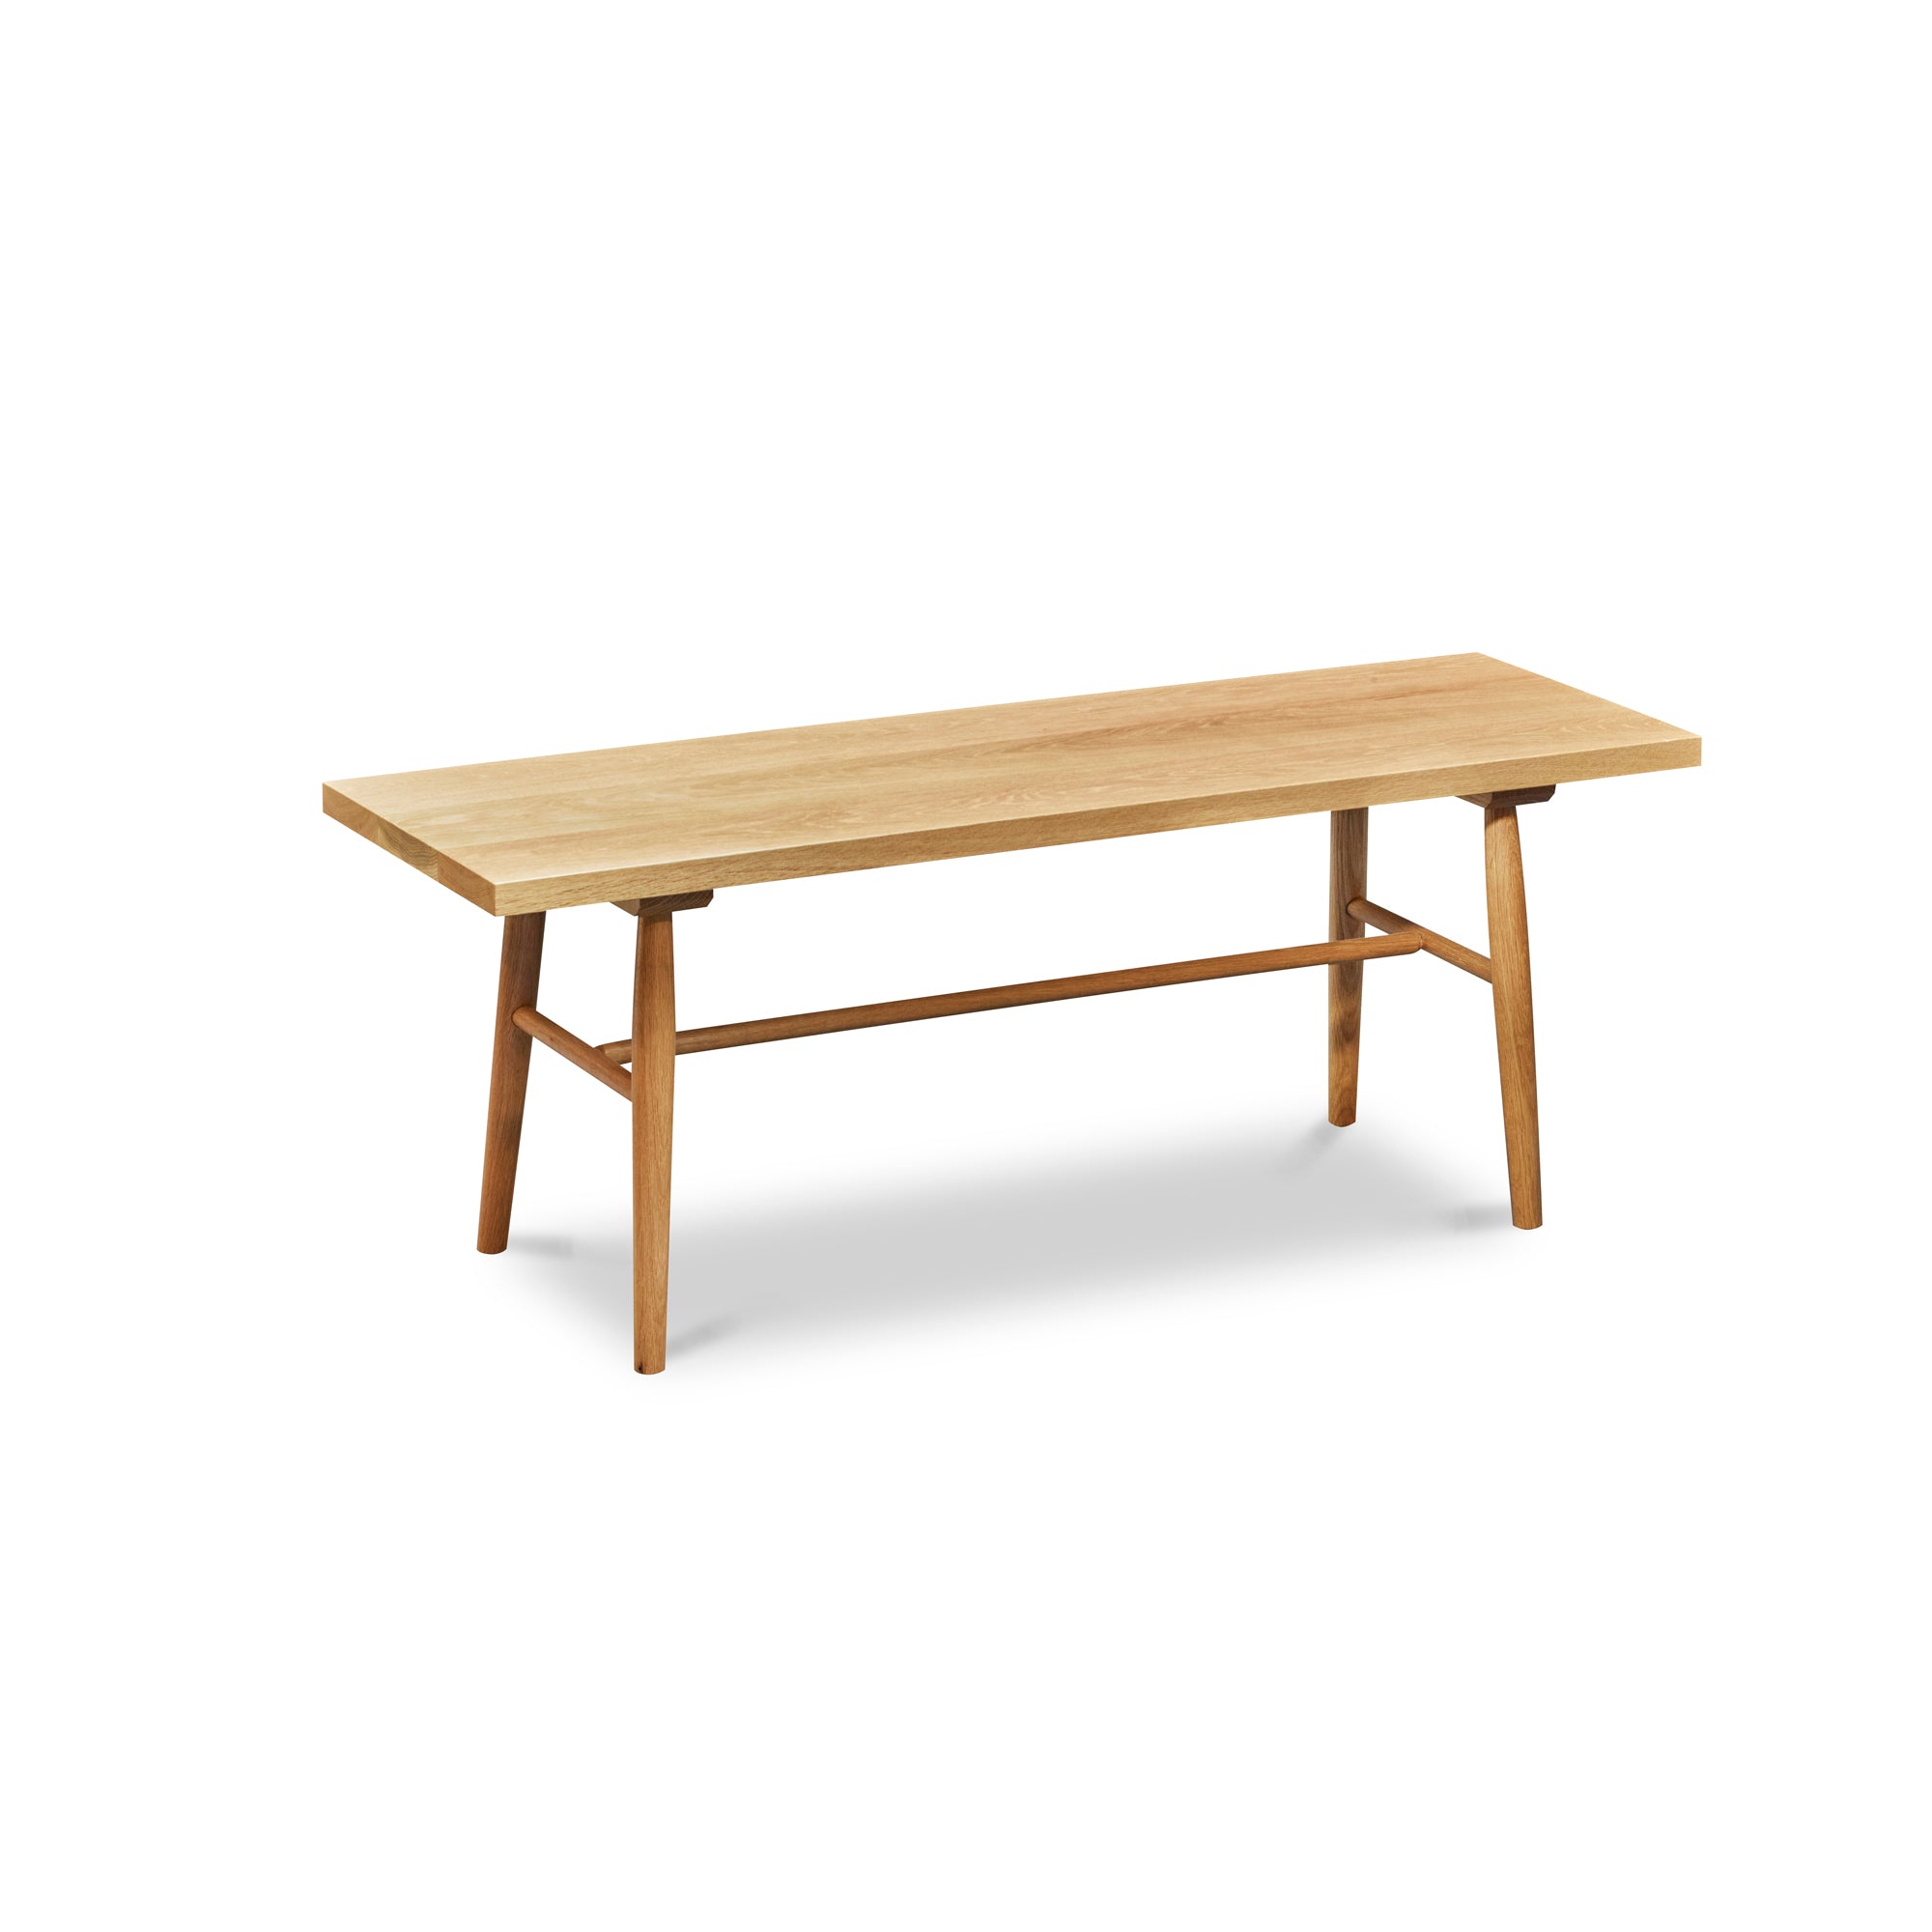 Hudson bench in white oak with turned legs from Maine's Chilton Furniture Co.